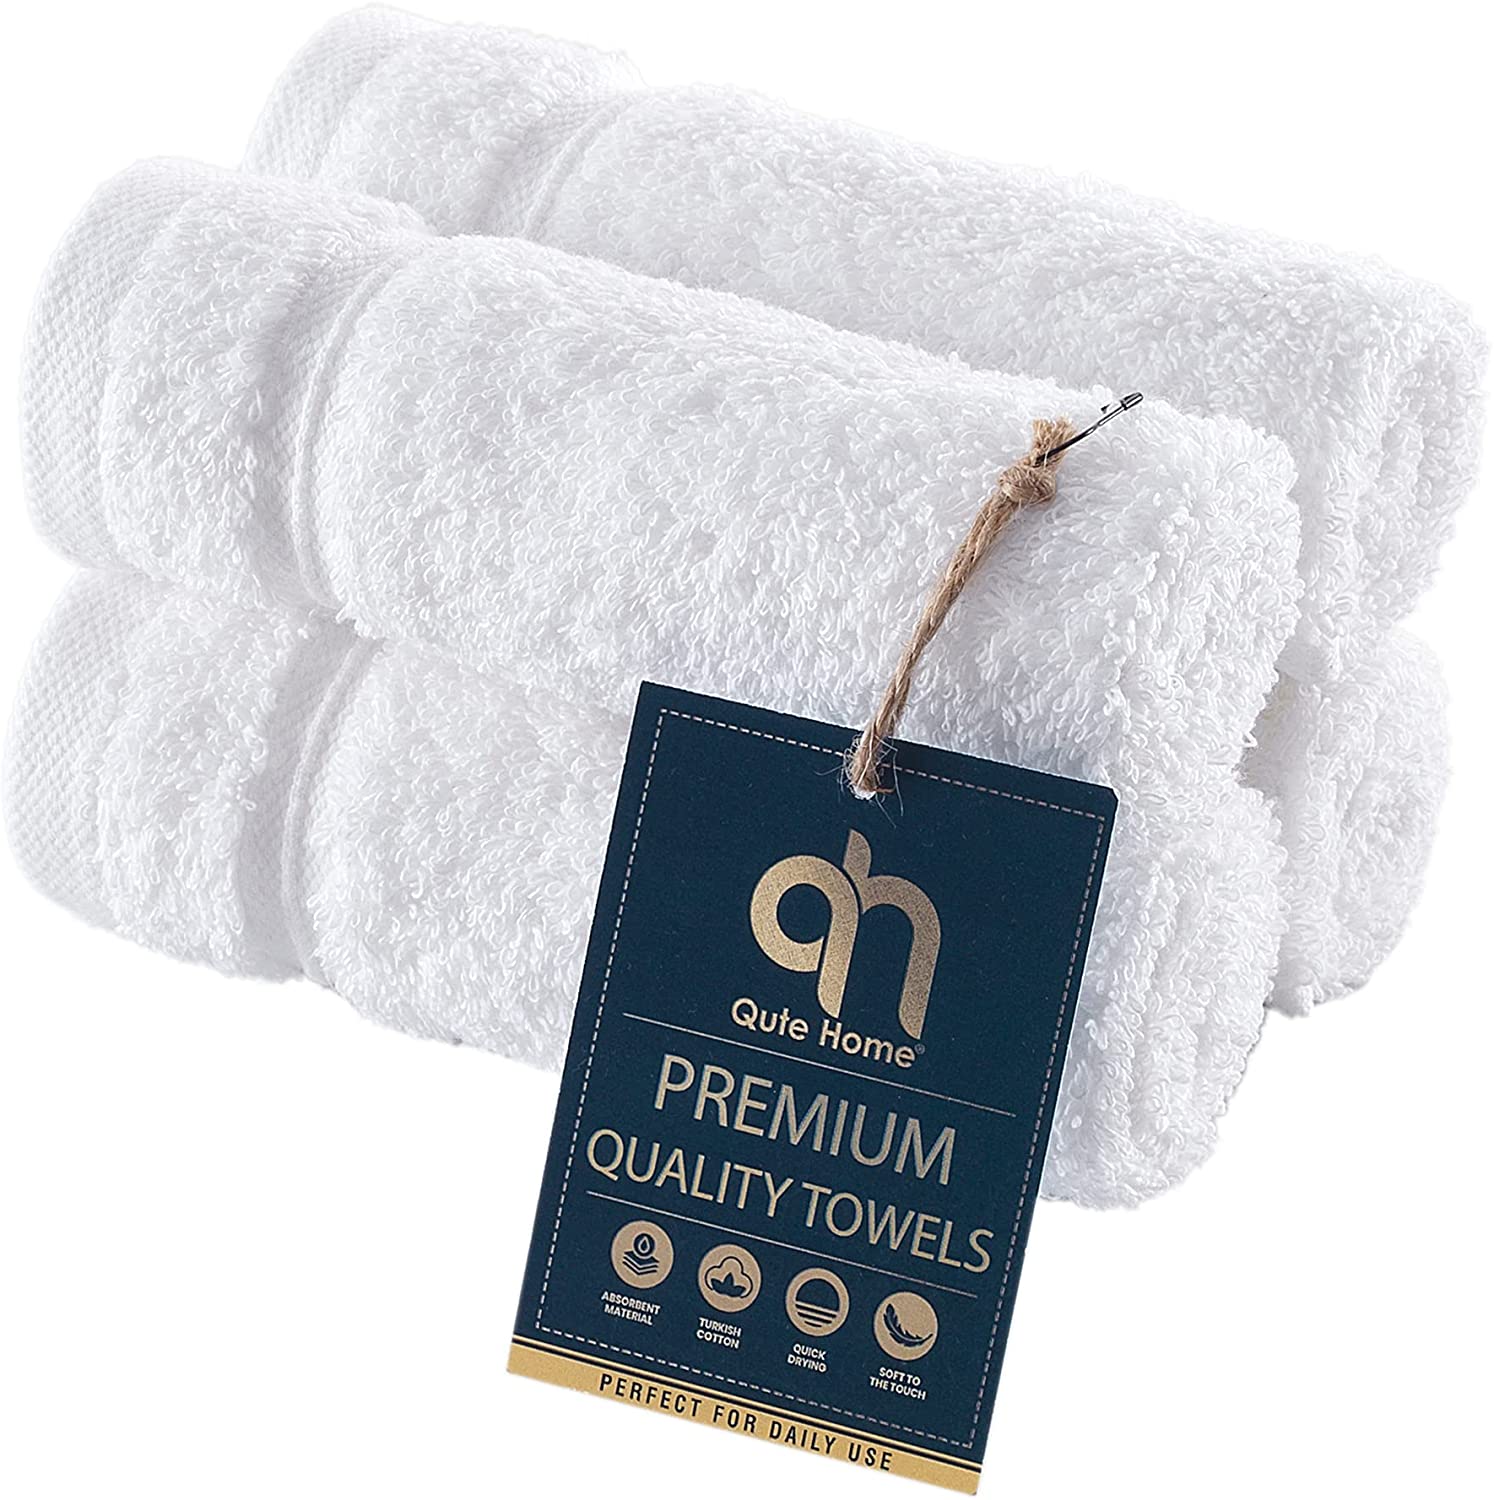 Qute Home Hotel Quality Turkish Washcloths, 4-Pack